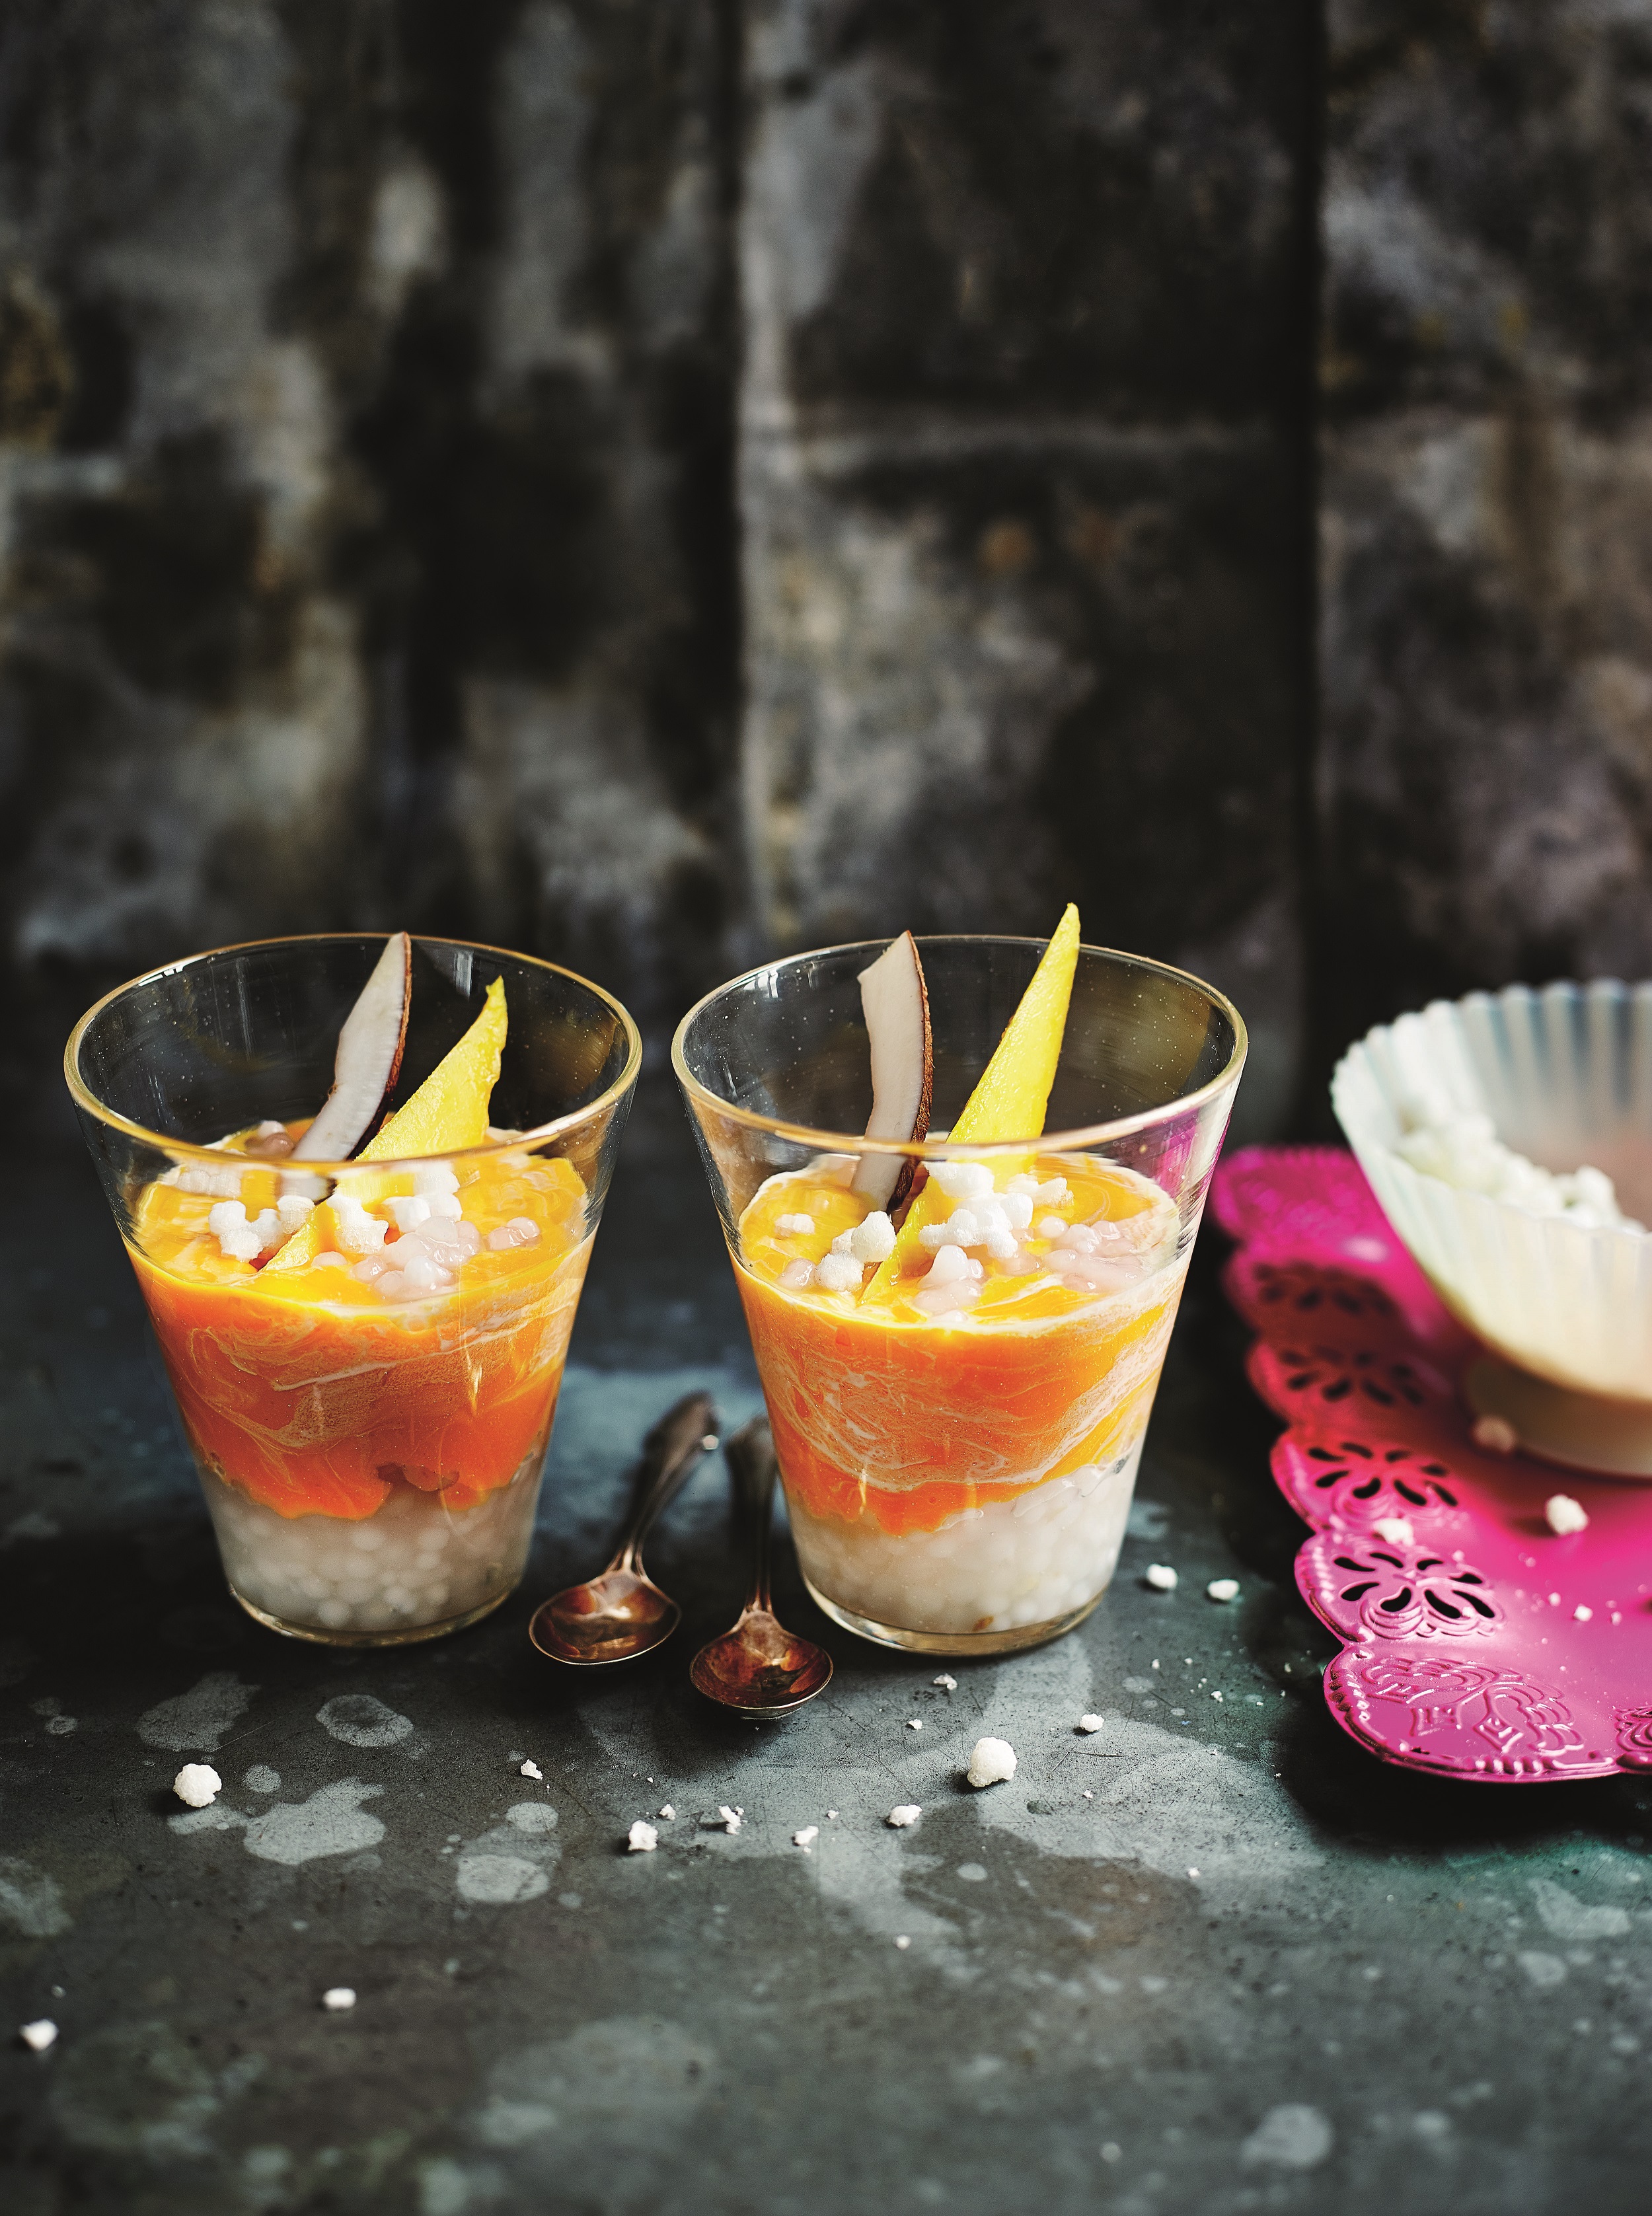 Chilled Mango, Coconut and “Pearl” Puddings